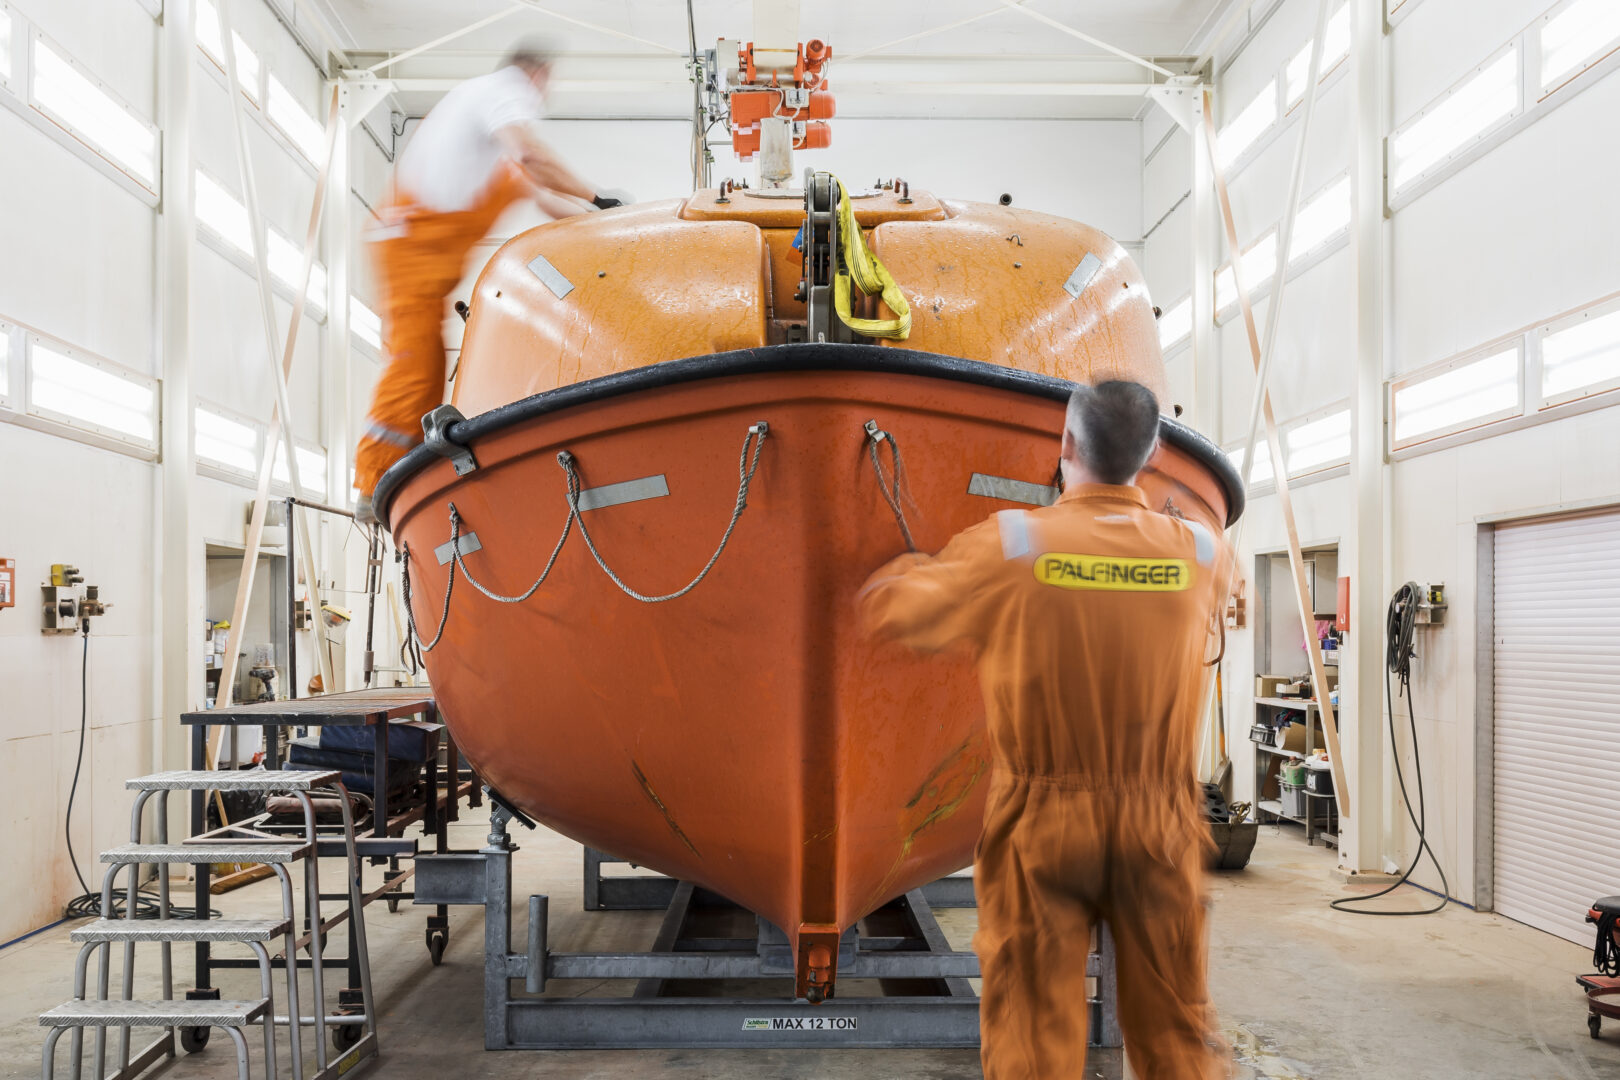 Two man clad in workwear in a workshop doing maintenance/service work on an orange colored, totally enclosed lifeboat.